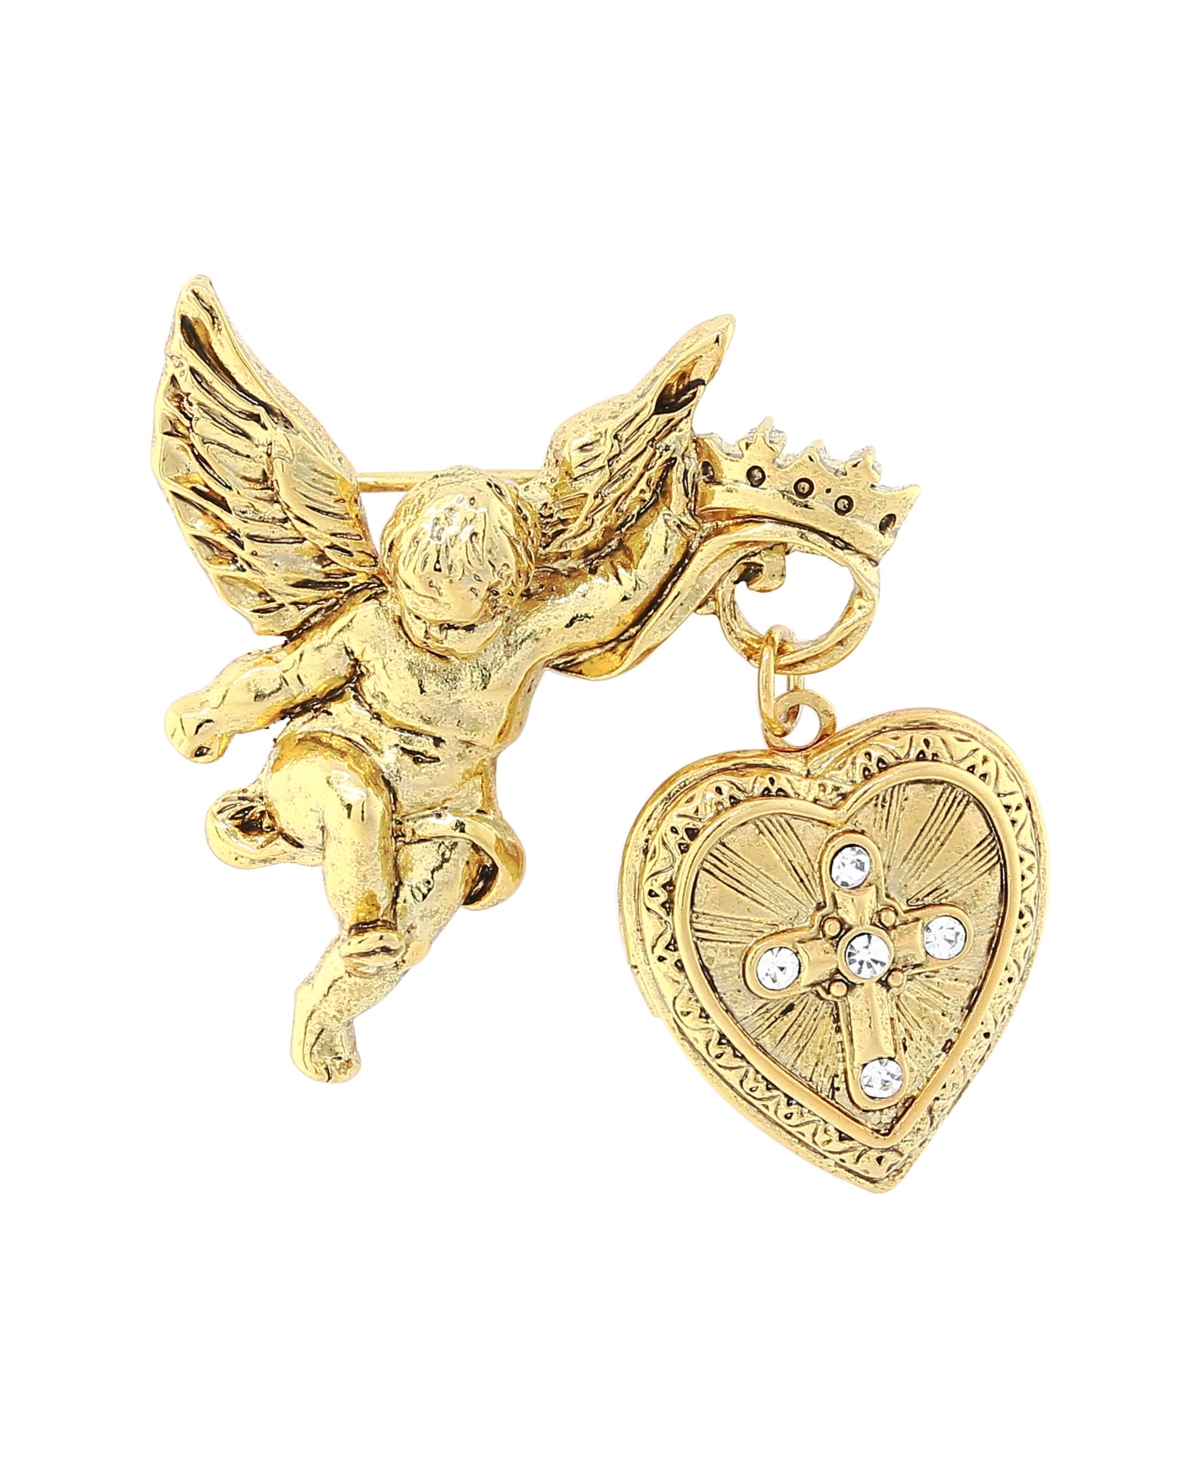 14K Gold-Dipped Crystal Glory of The Cross Fob Locket Brooch - Yellow